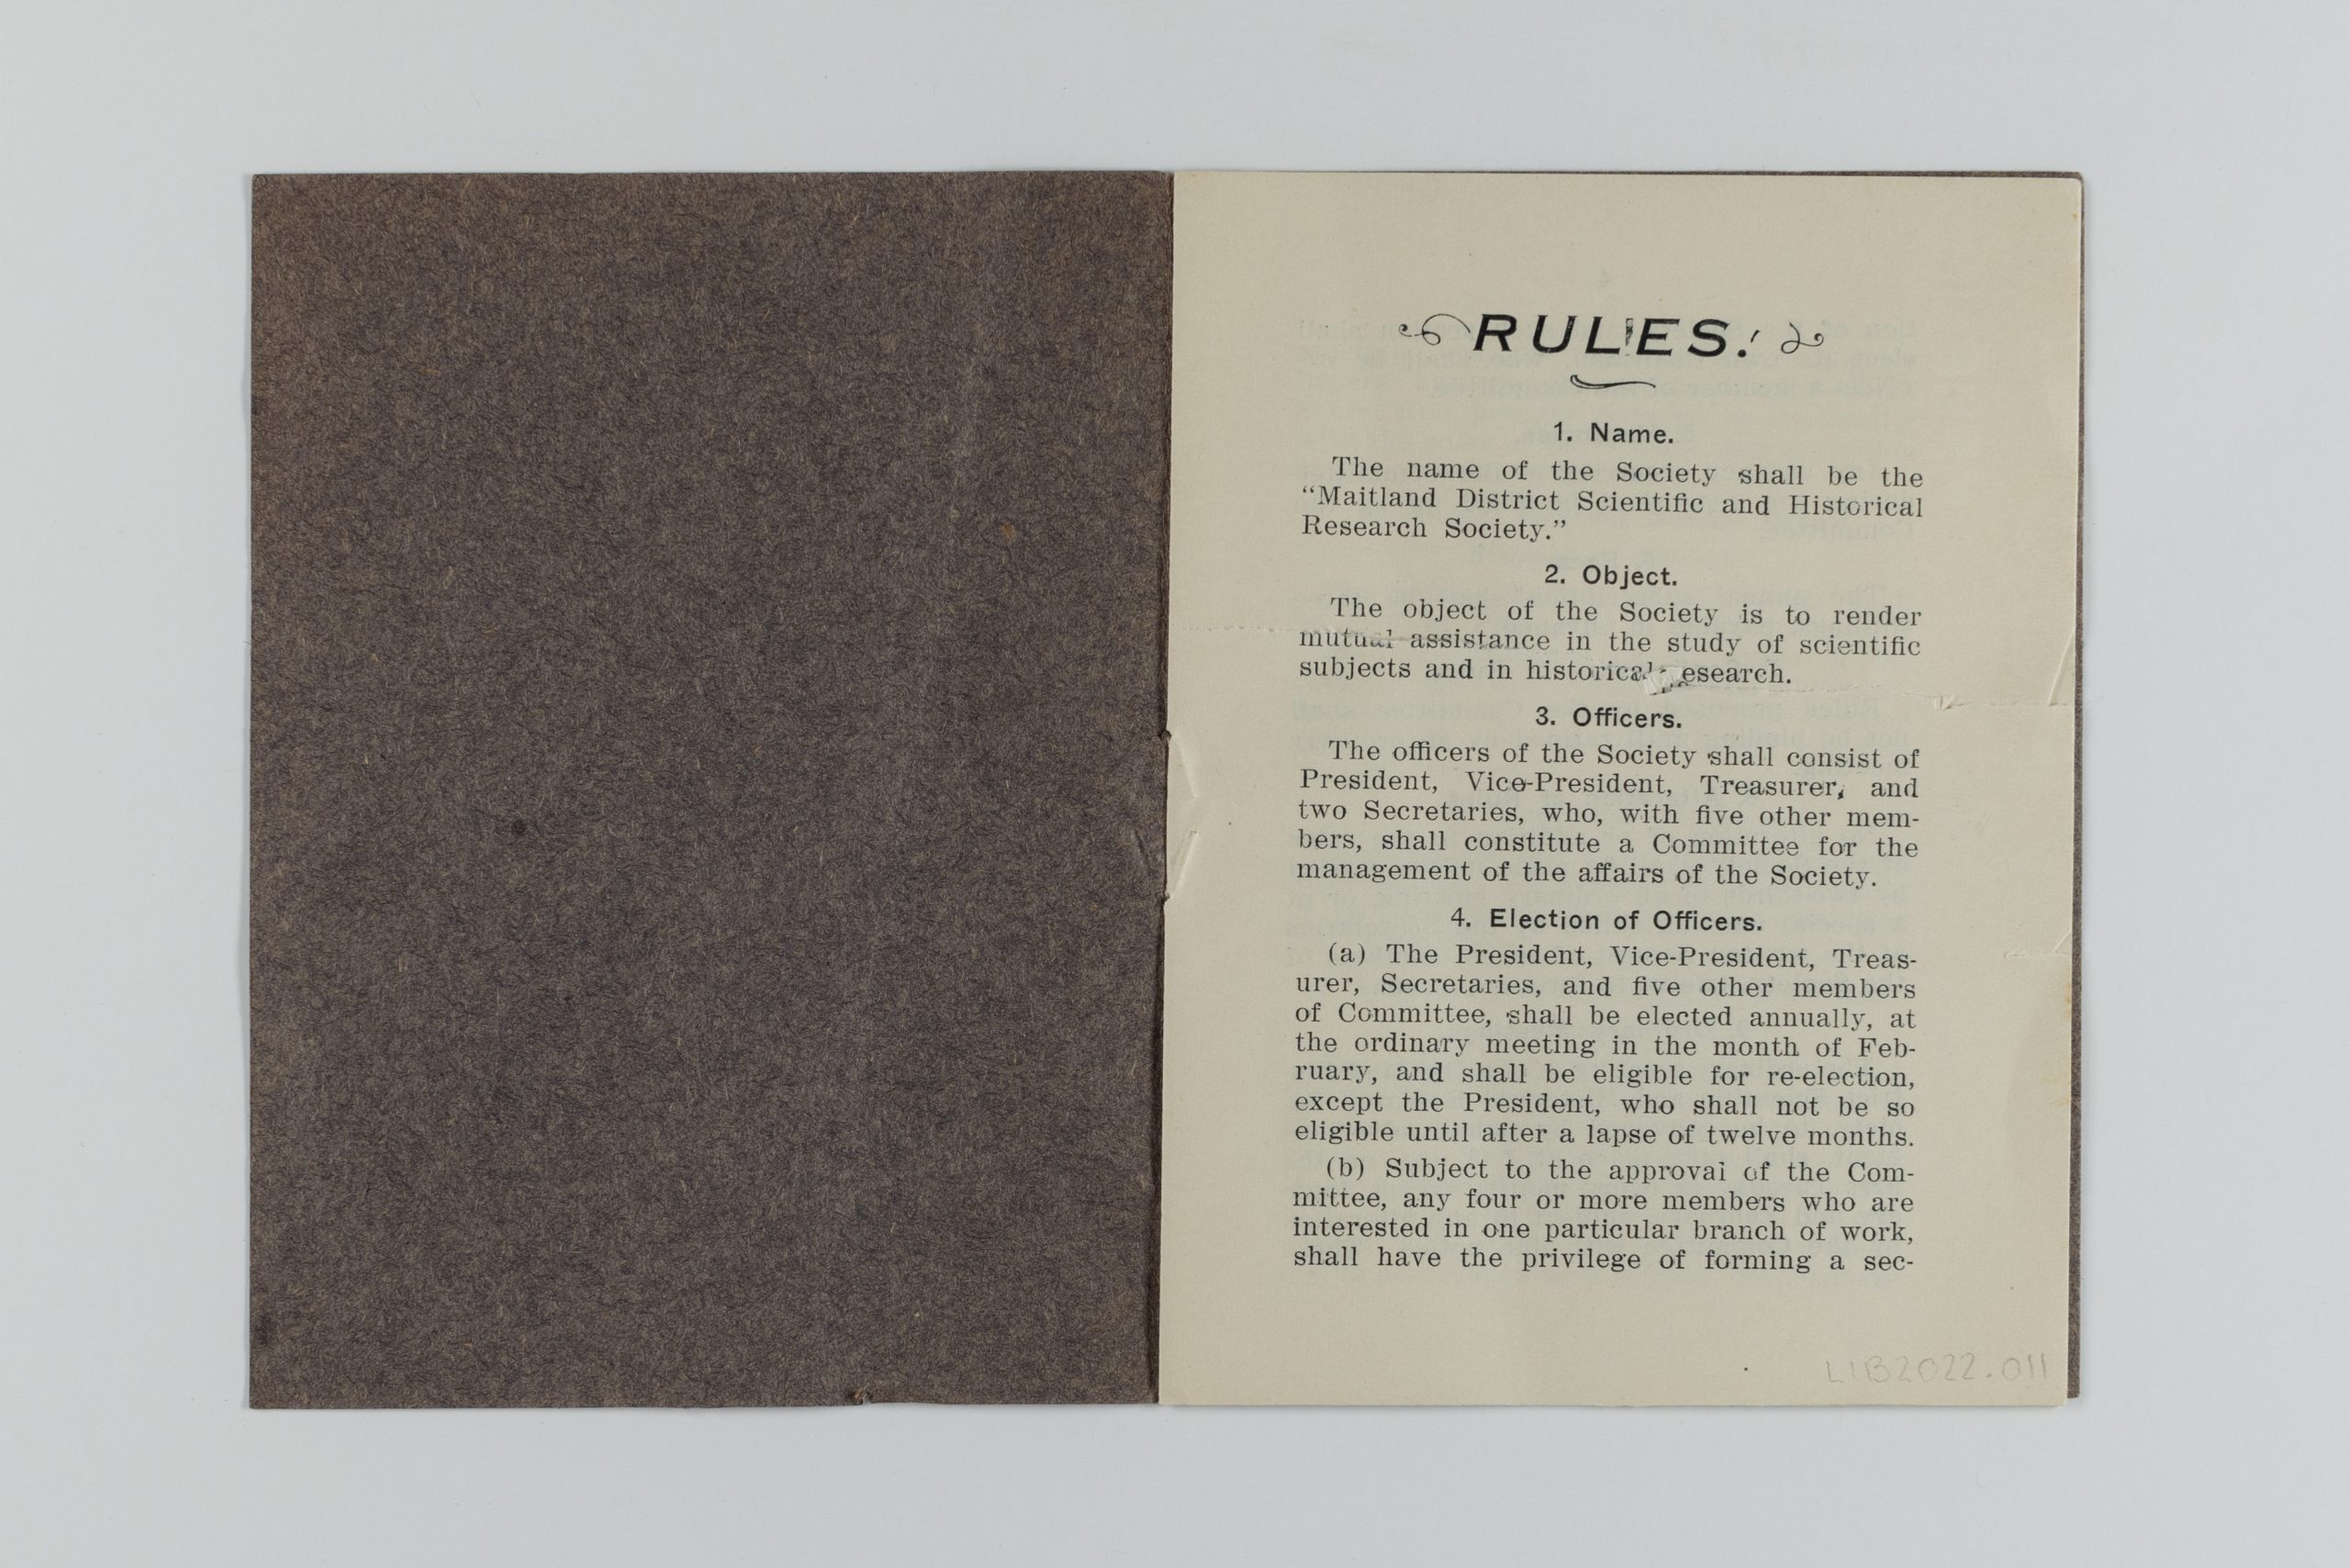 Printed book with brown cover opened to the first page. It showcases rules 1-4, including the name and objective of the society, as well as the role of officers and their election.